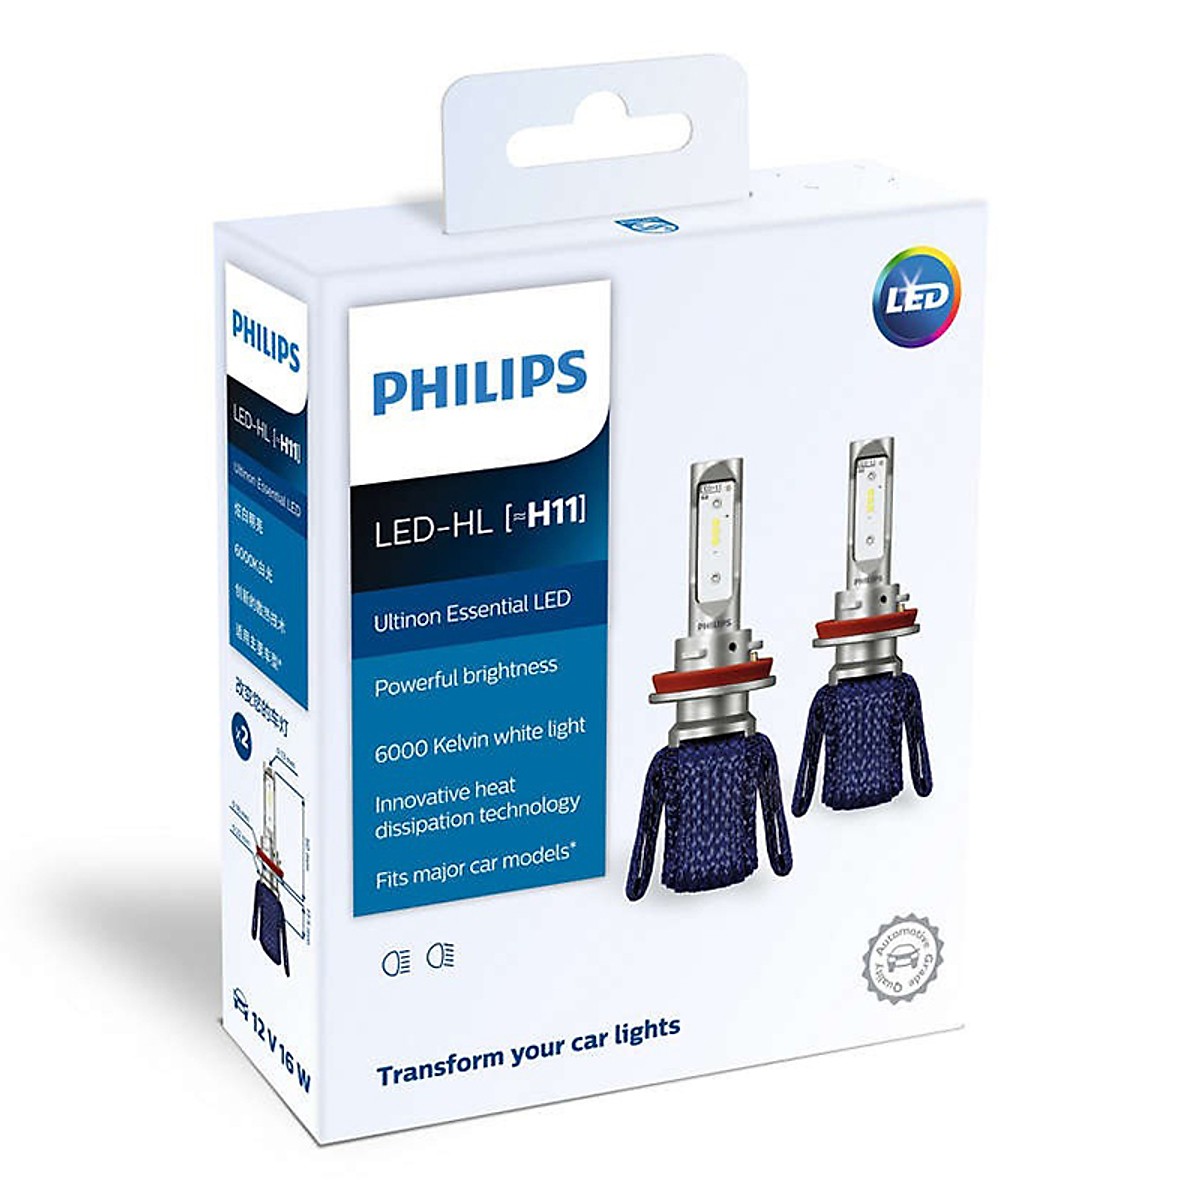 LED PHILIPS H11 ULTINON ESSENTIAL